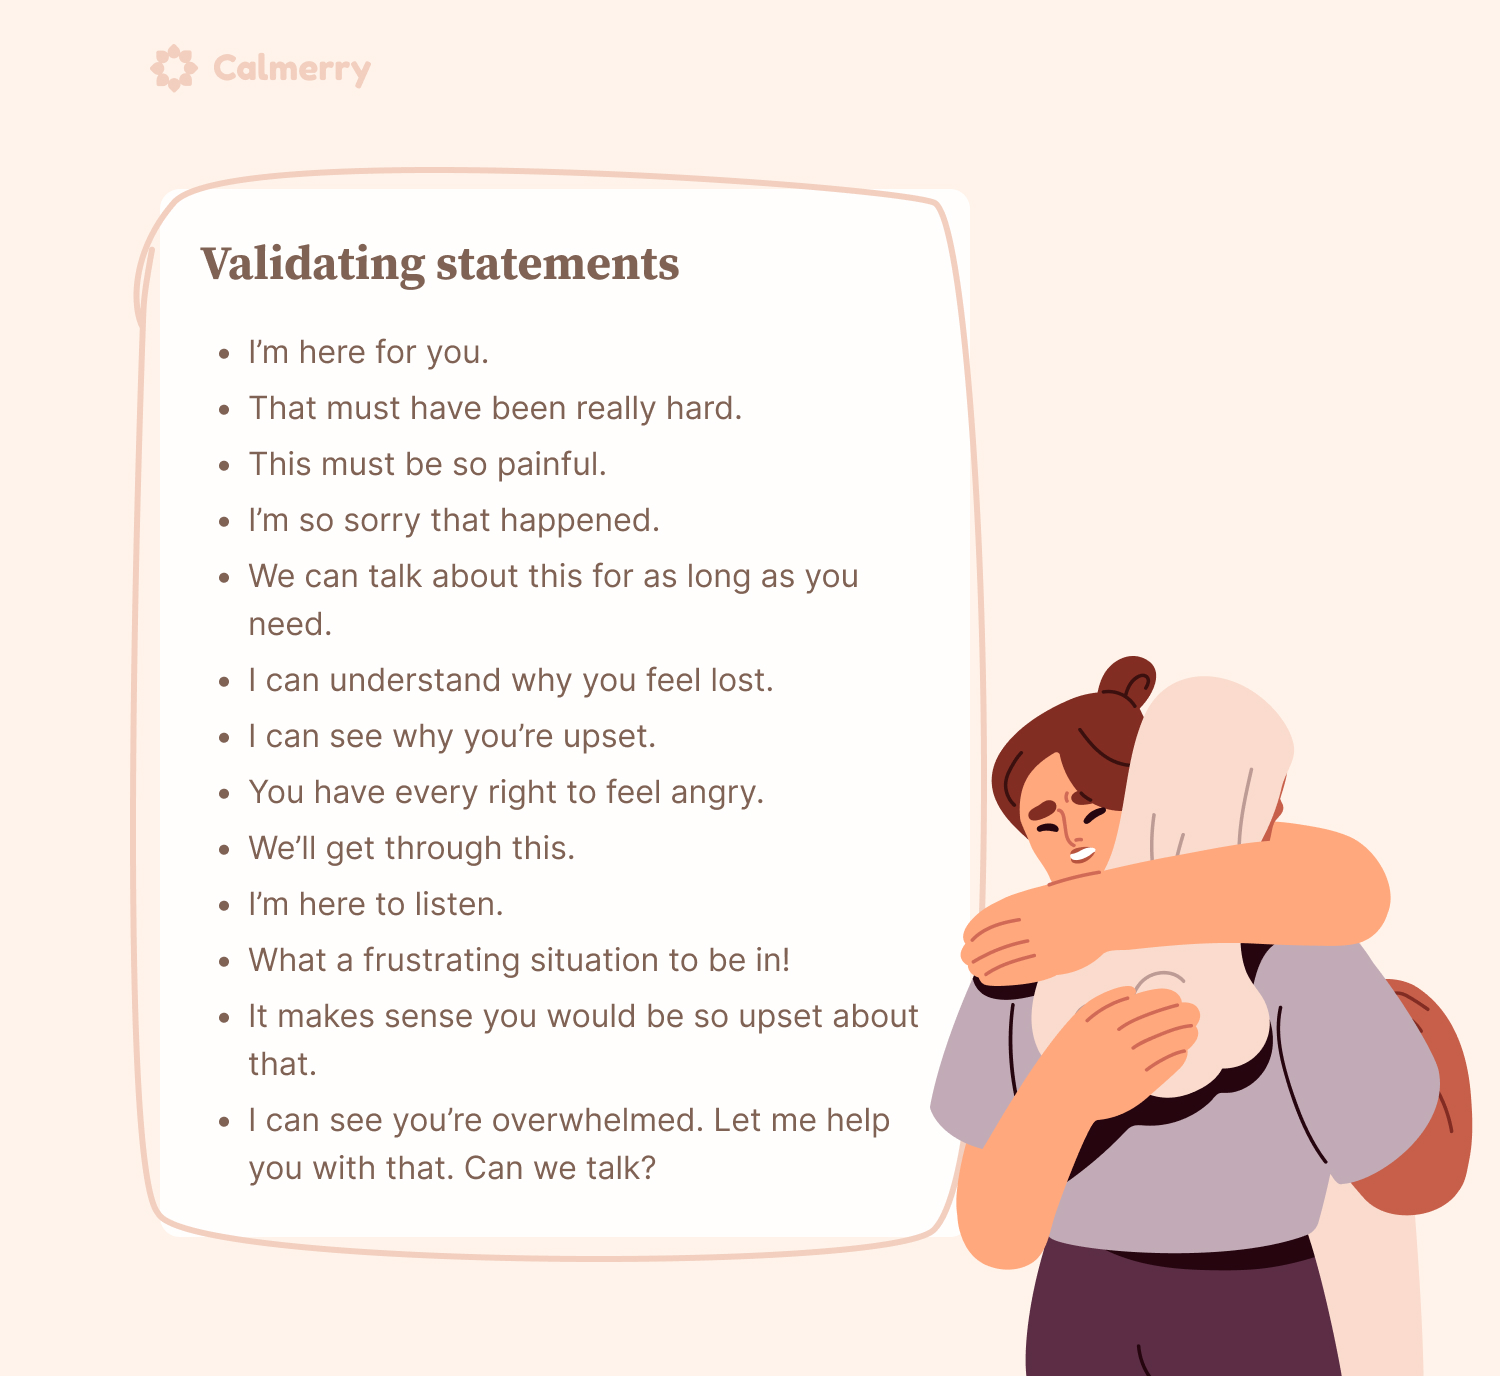 examples of validating statements